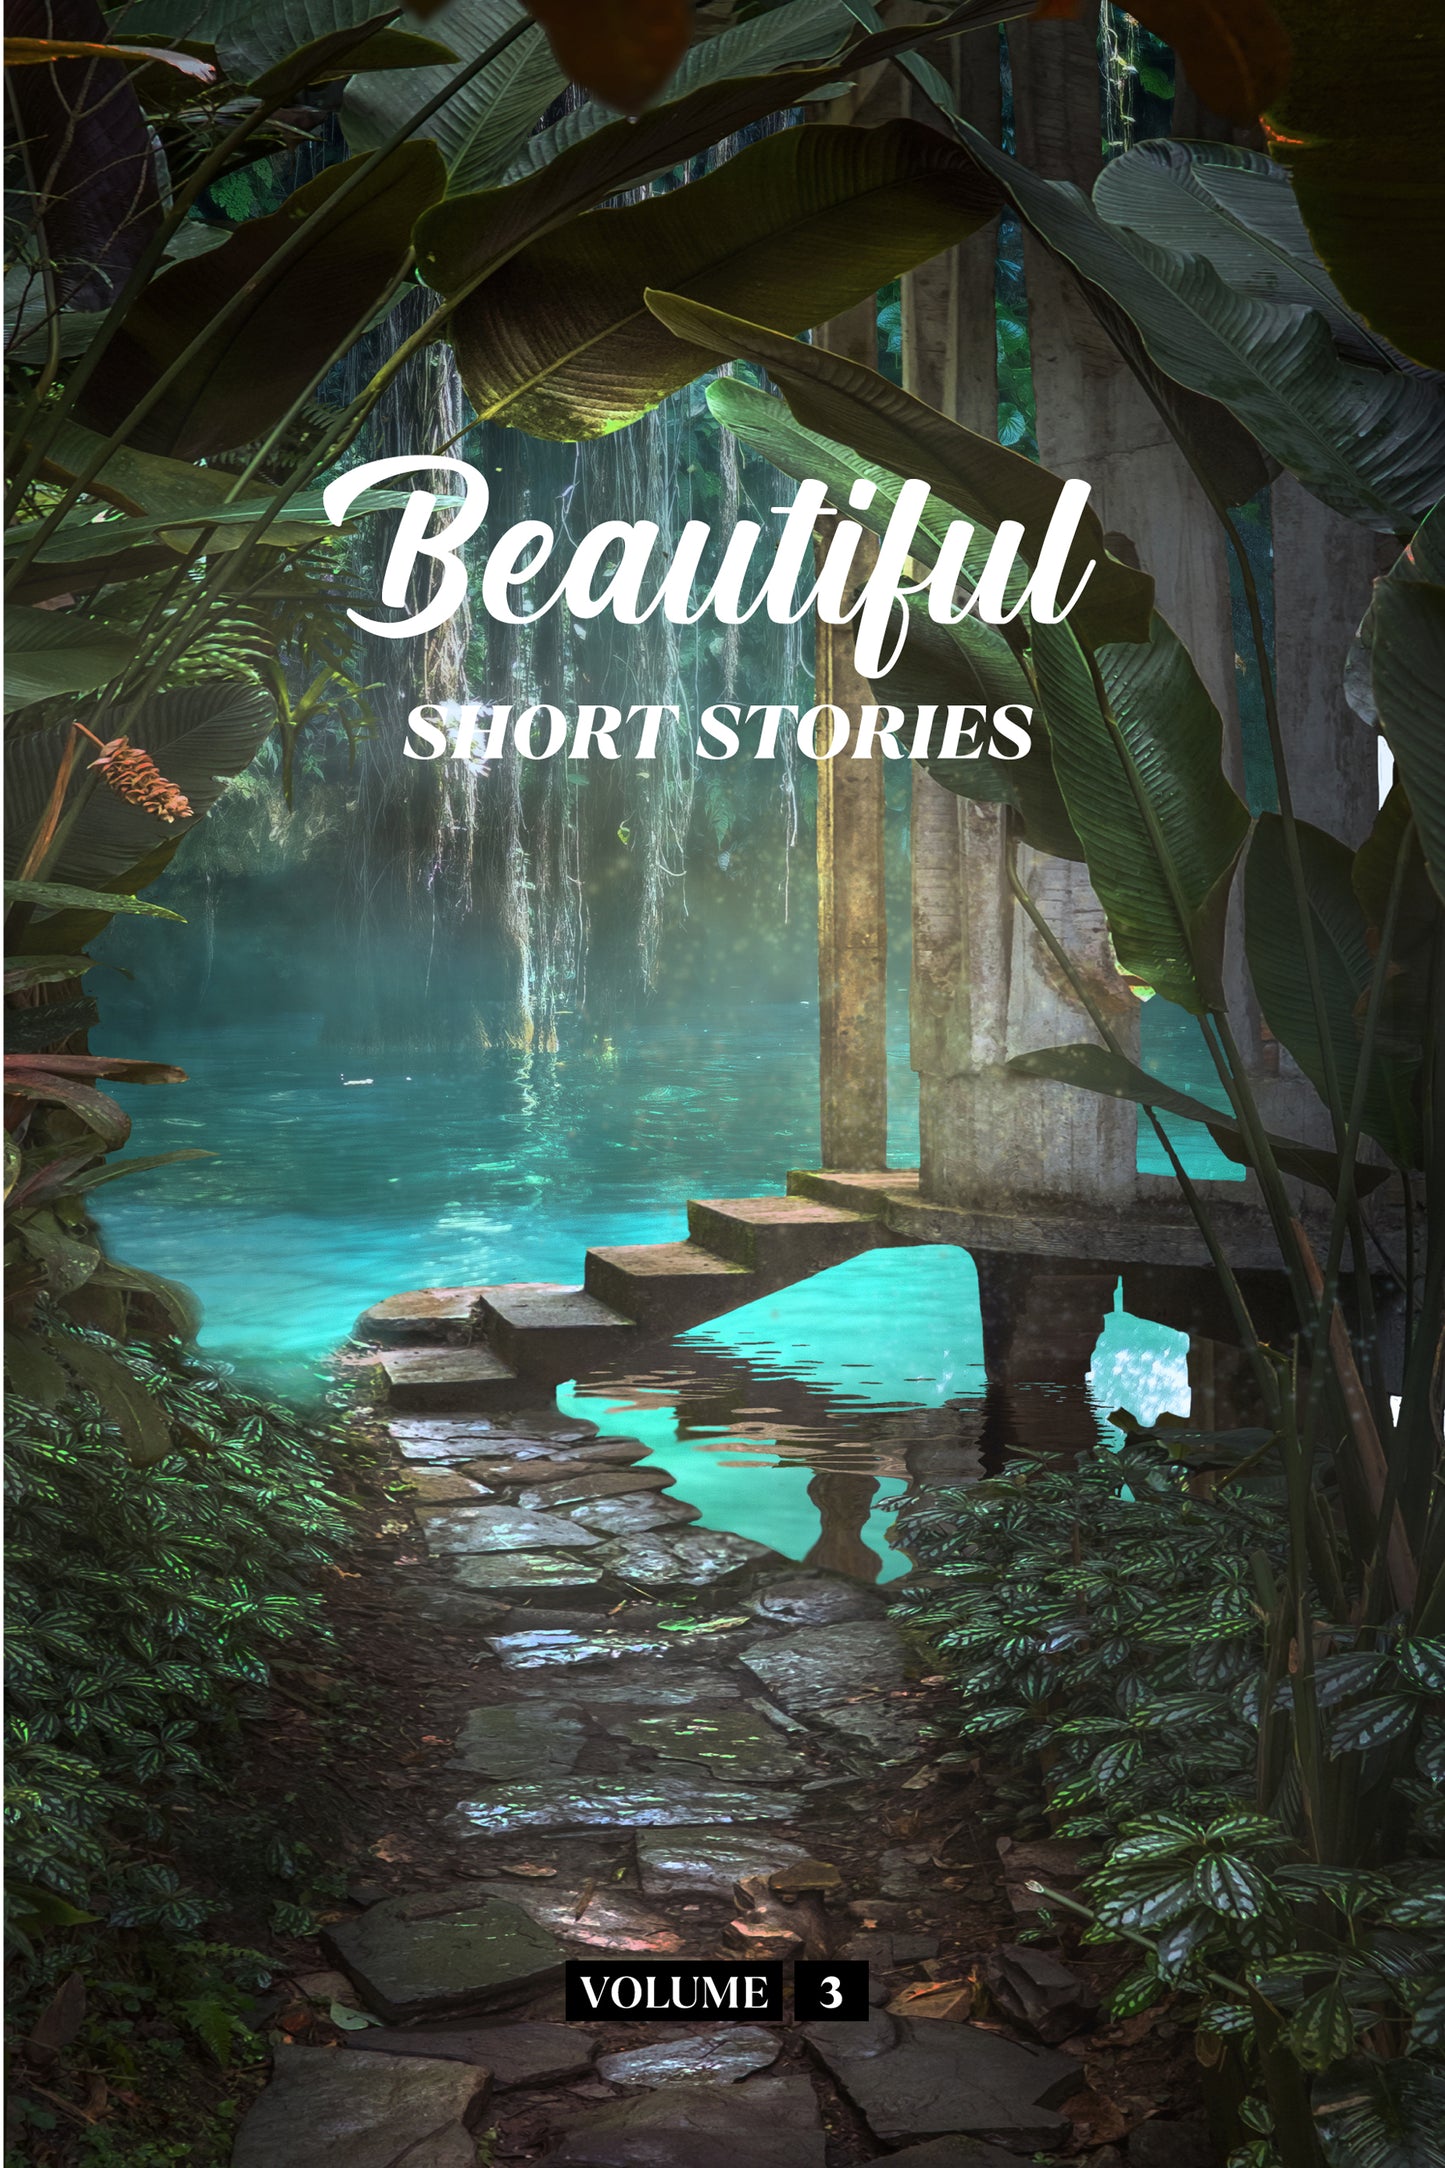 Beautiful Short Stories Volume 3 (Physical Book Pre-Order)